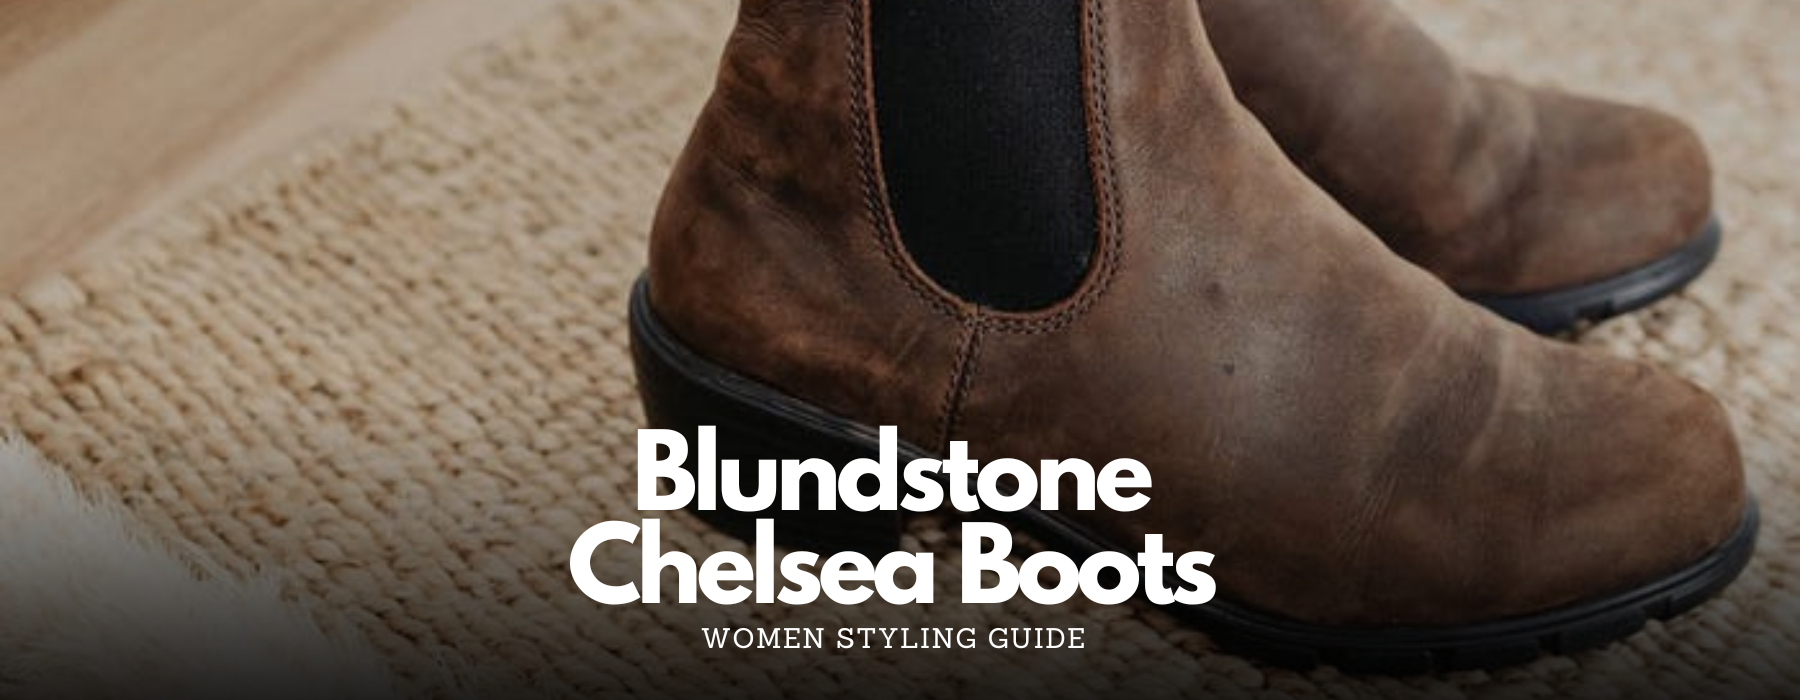 Women Styling Guide for Blundstone Chelsea Boots - Upperclass Fashions 